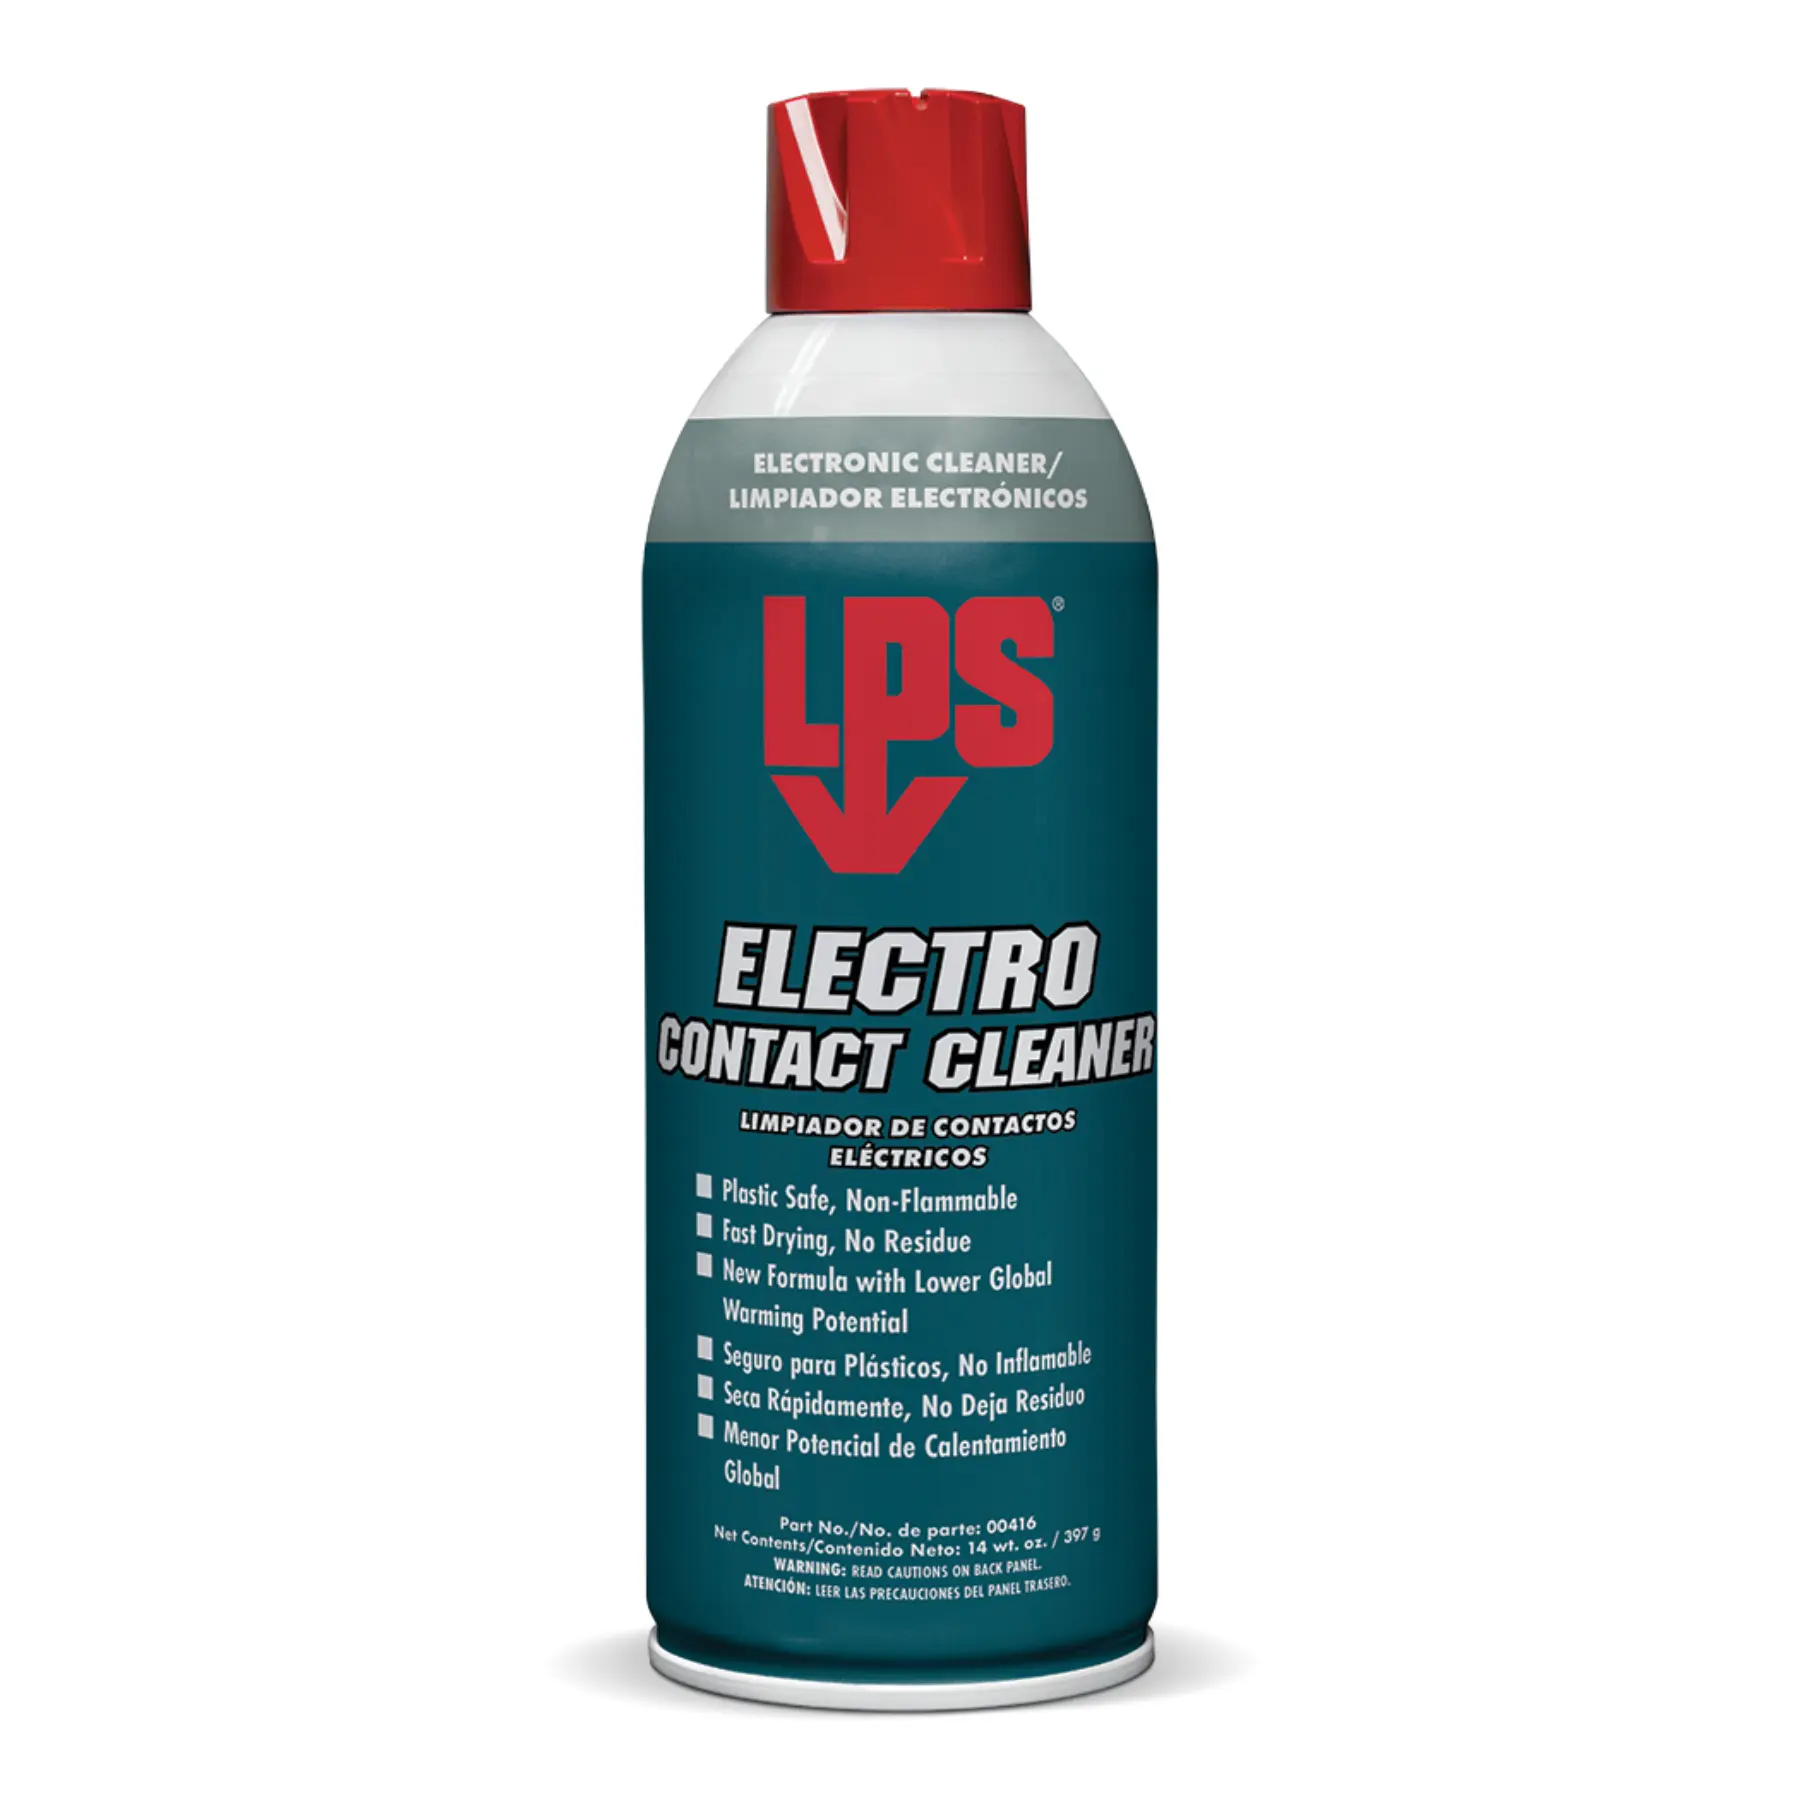 LPS ELECTRO CONTACT CLEANER 00416